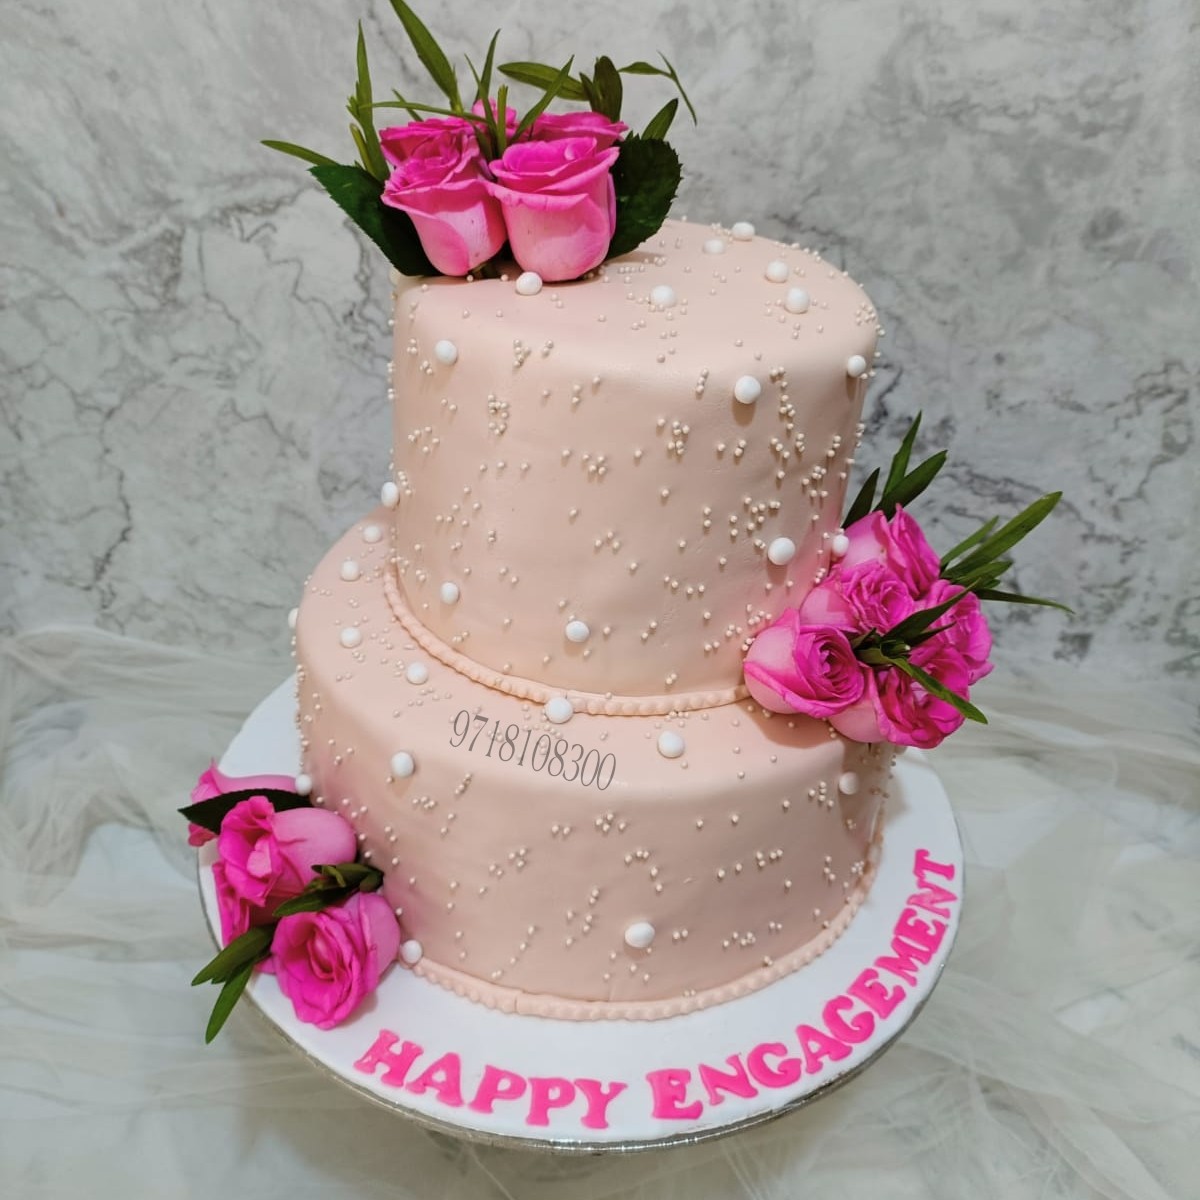 Waffy Kitkat Gems Cake Delivery in Trichy, Order Cake Online Trichy, Cake  Home Delivery, Send Cake as Gift by Cake World Online, Online Shopping India